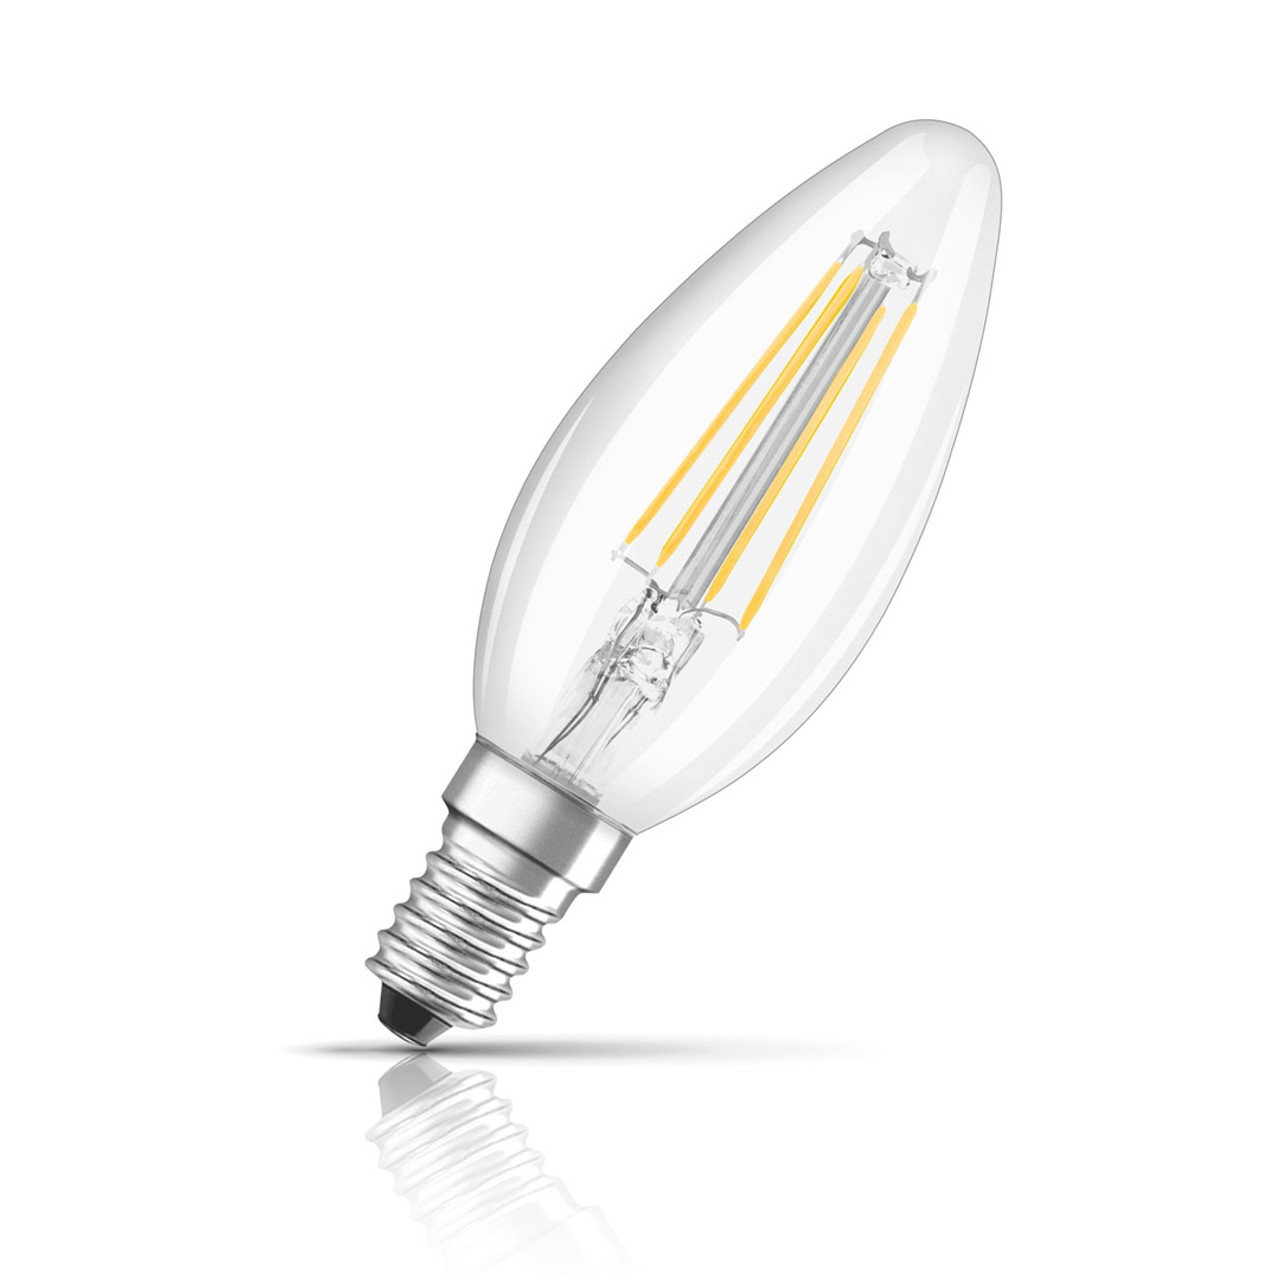 Candle Bulb Clear E14 40w Pack Of 10